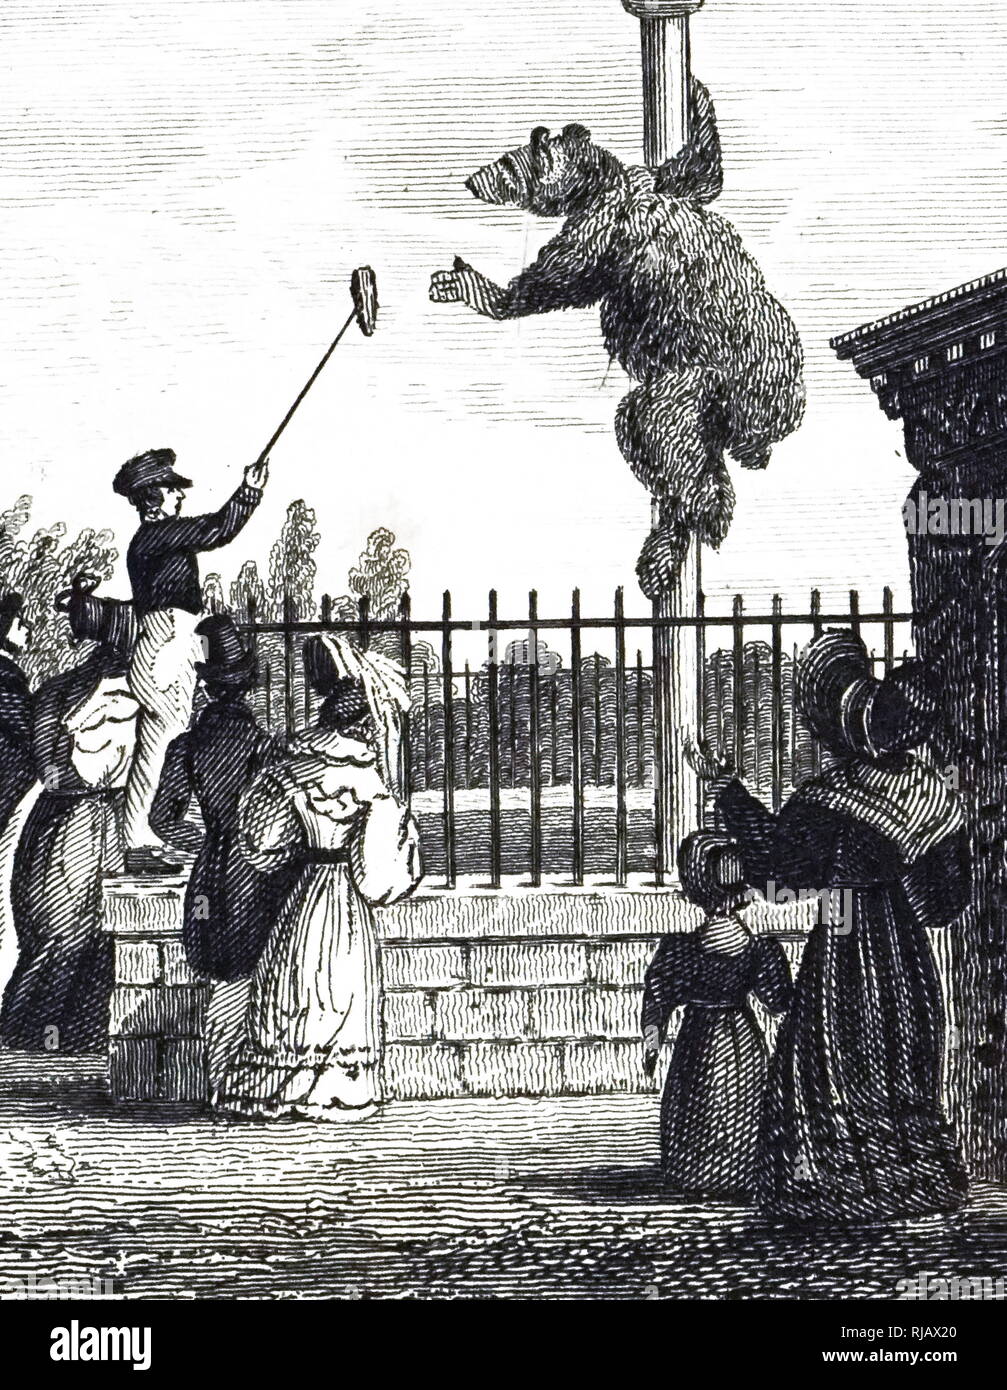 An engraving depicting the Bear Pit in the Royal Zoological Society's Gardens, Regent's Park, London. Dated 19th century Stock Photo